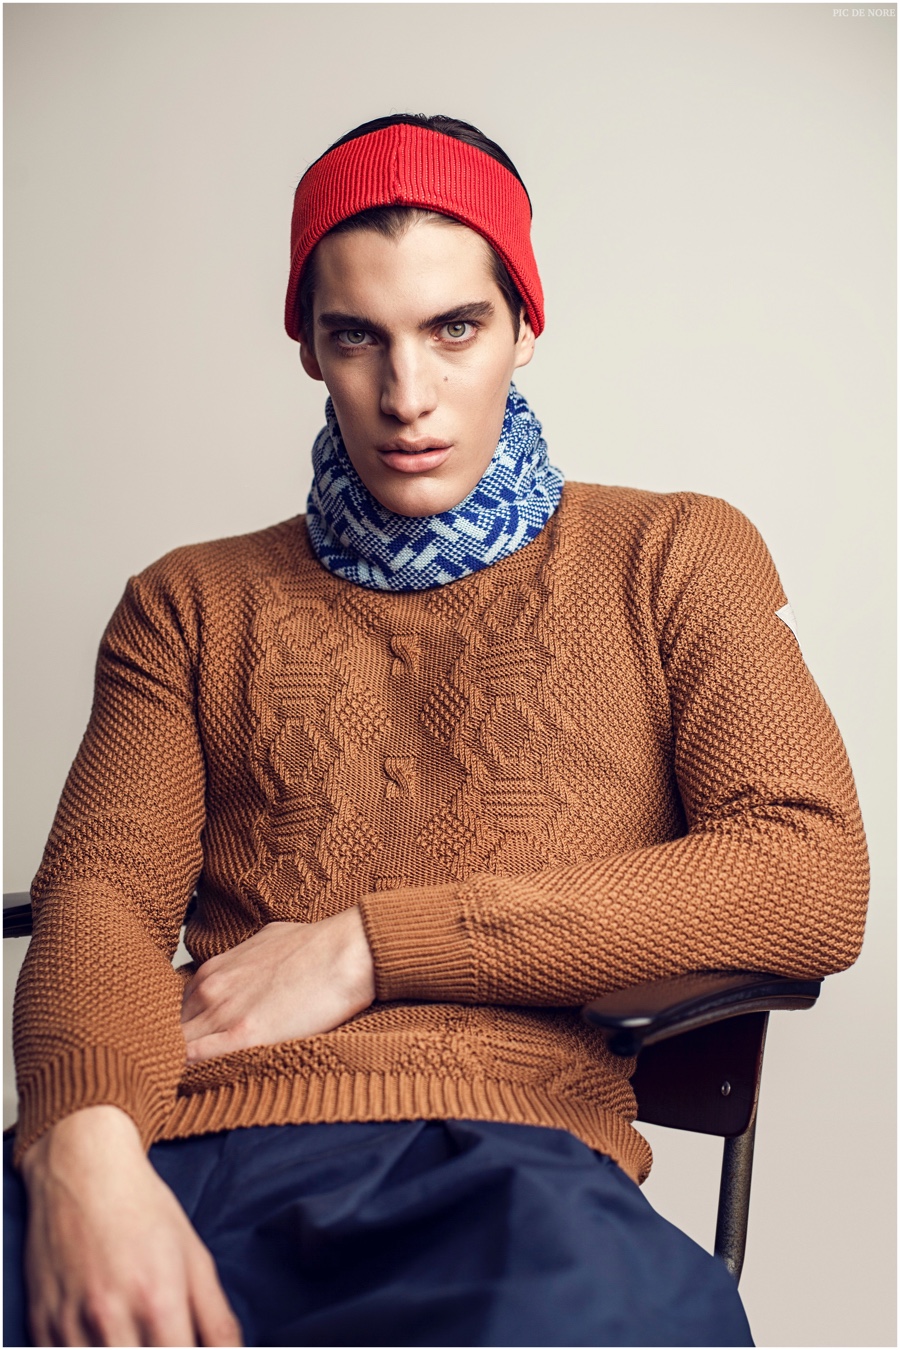 Pic de Nore Delivers Charming Knitwear Styles for Fall/Winter 2015 Men ...